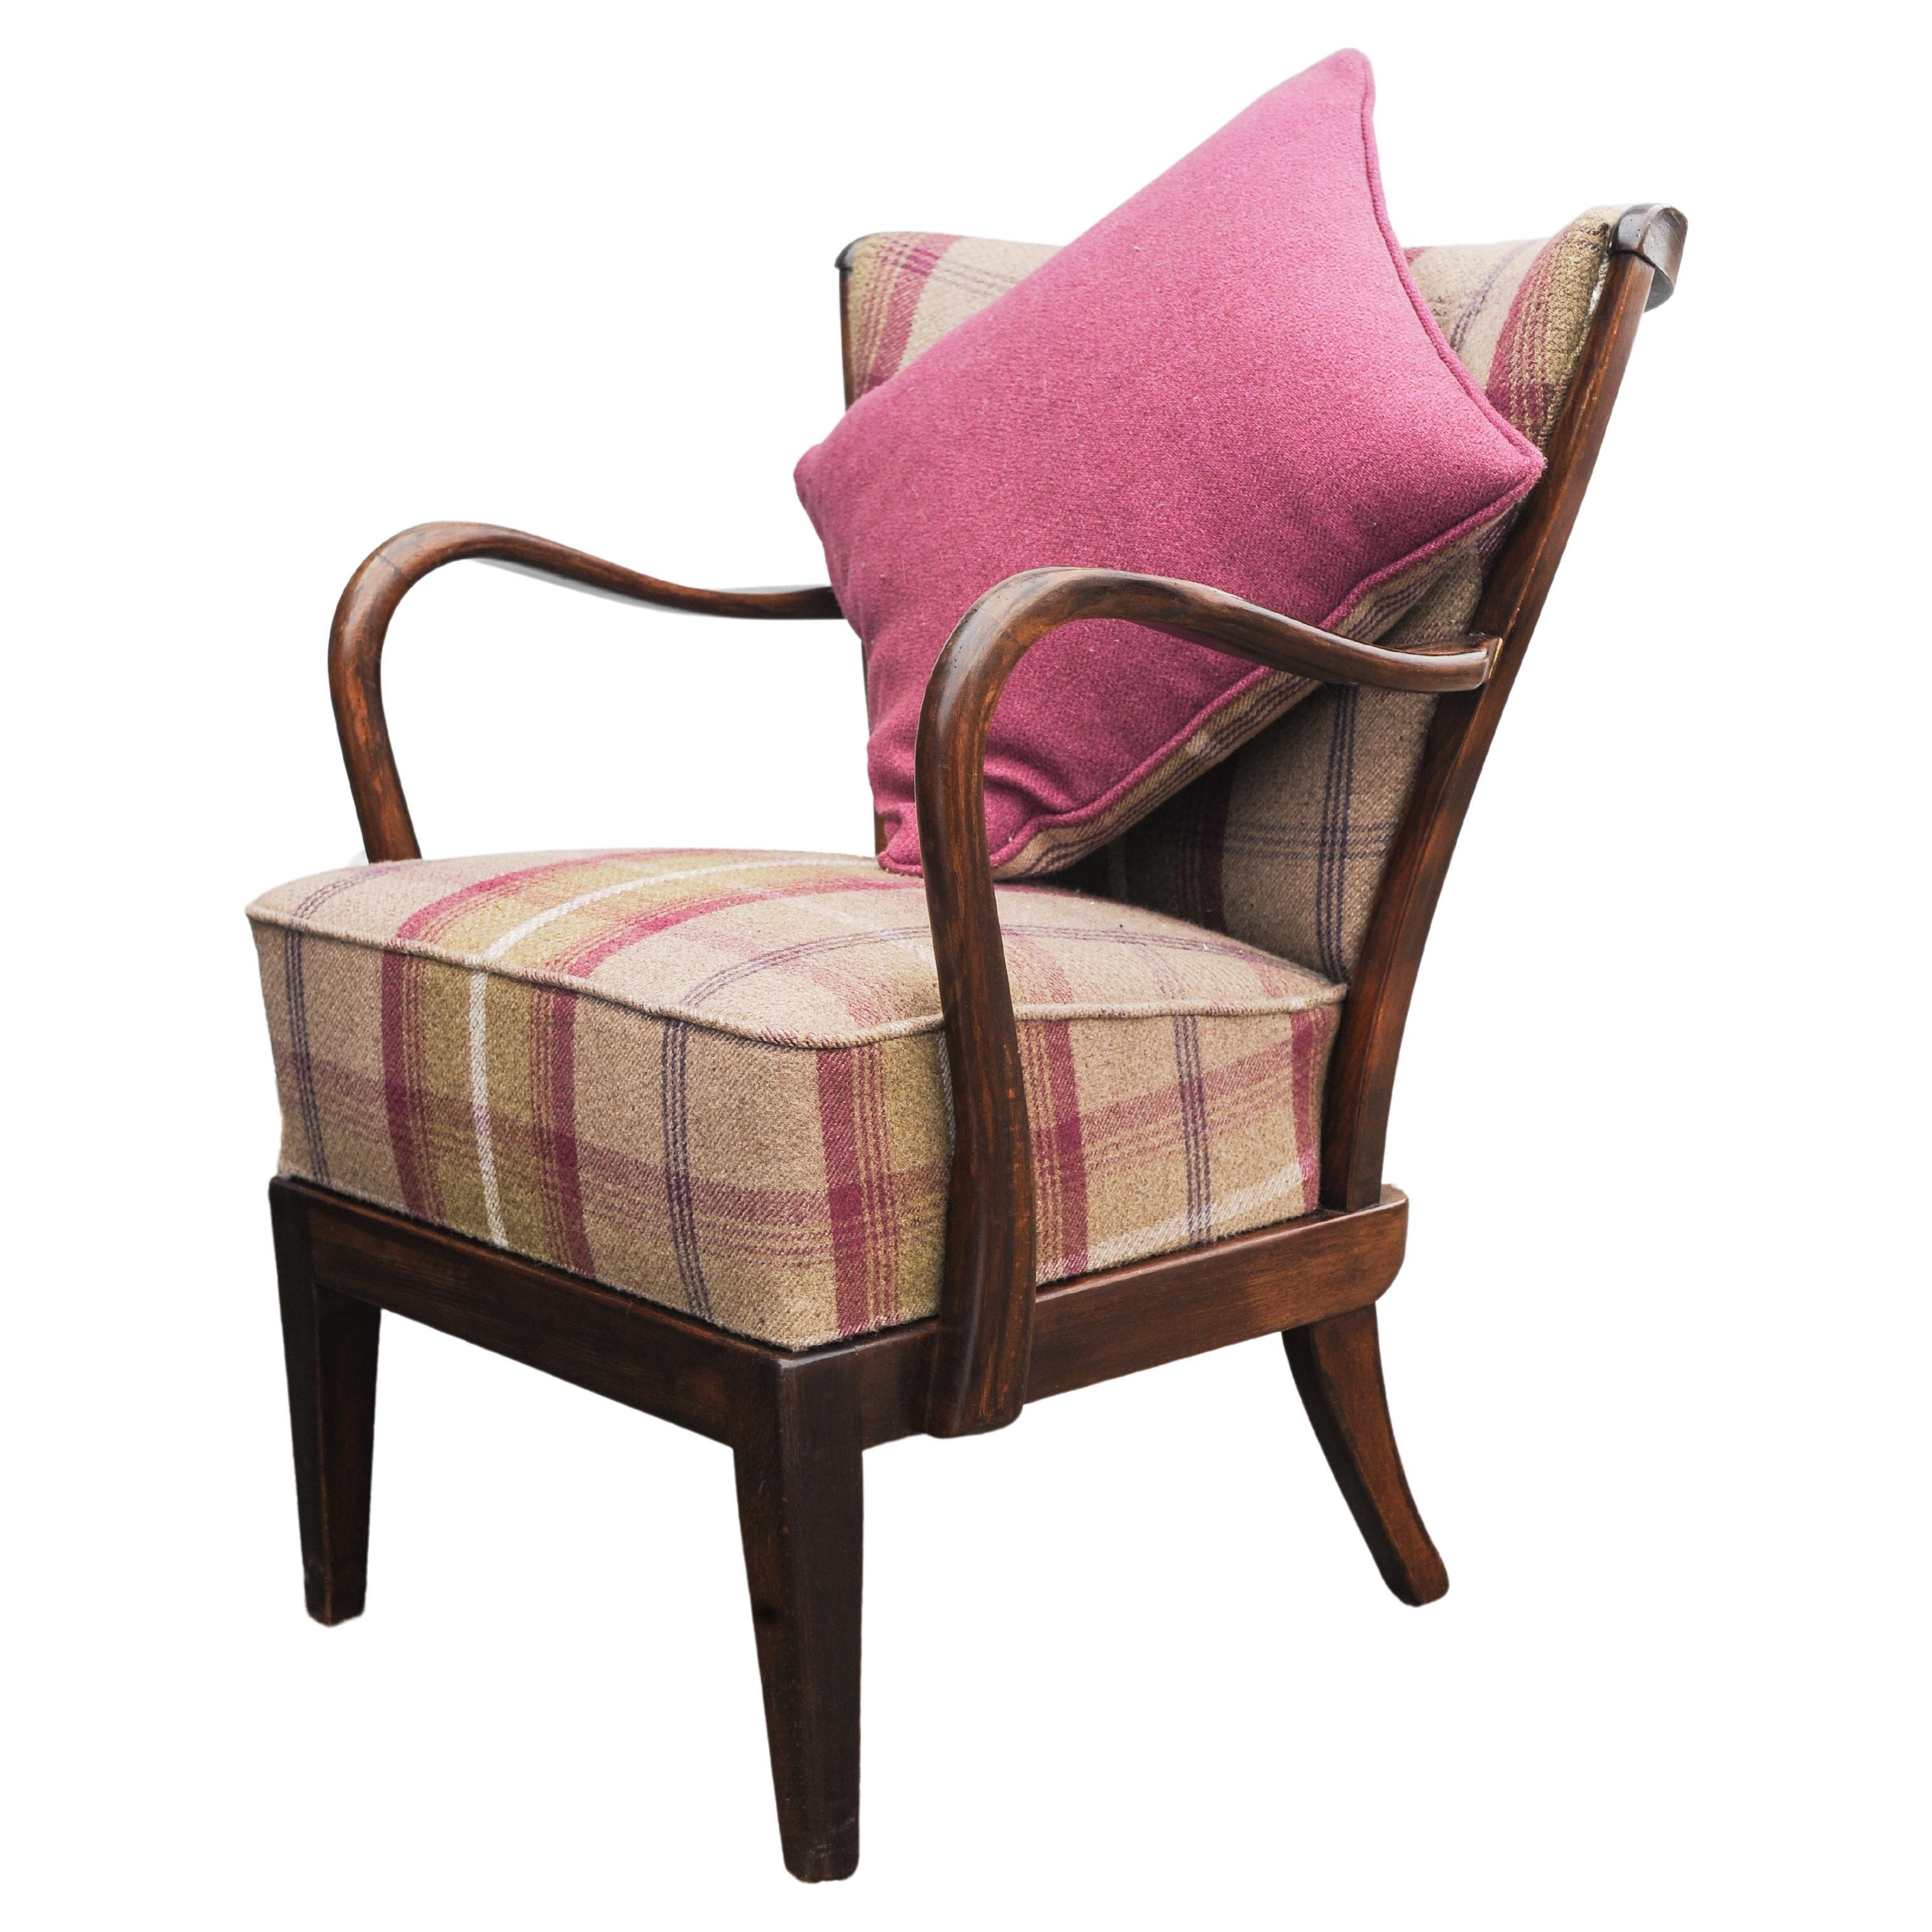 1940's Fritz Hansen Art Deco Oak Bentwood Armchair with Wool Plaid Upholstery  For Sale